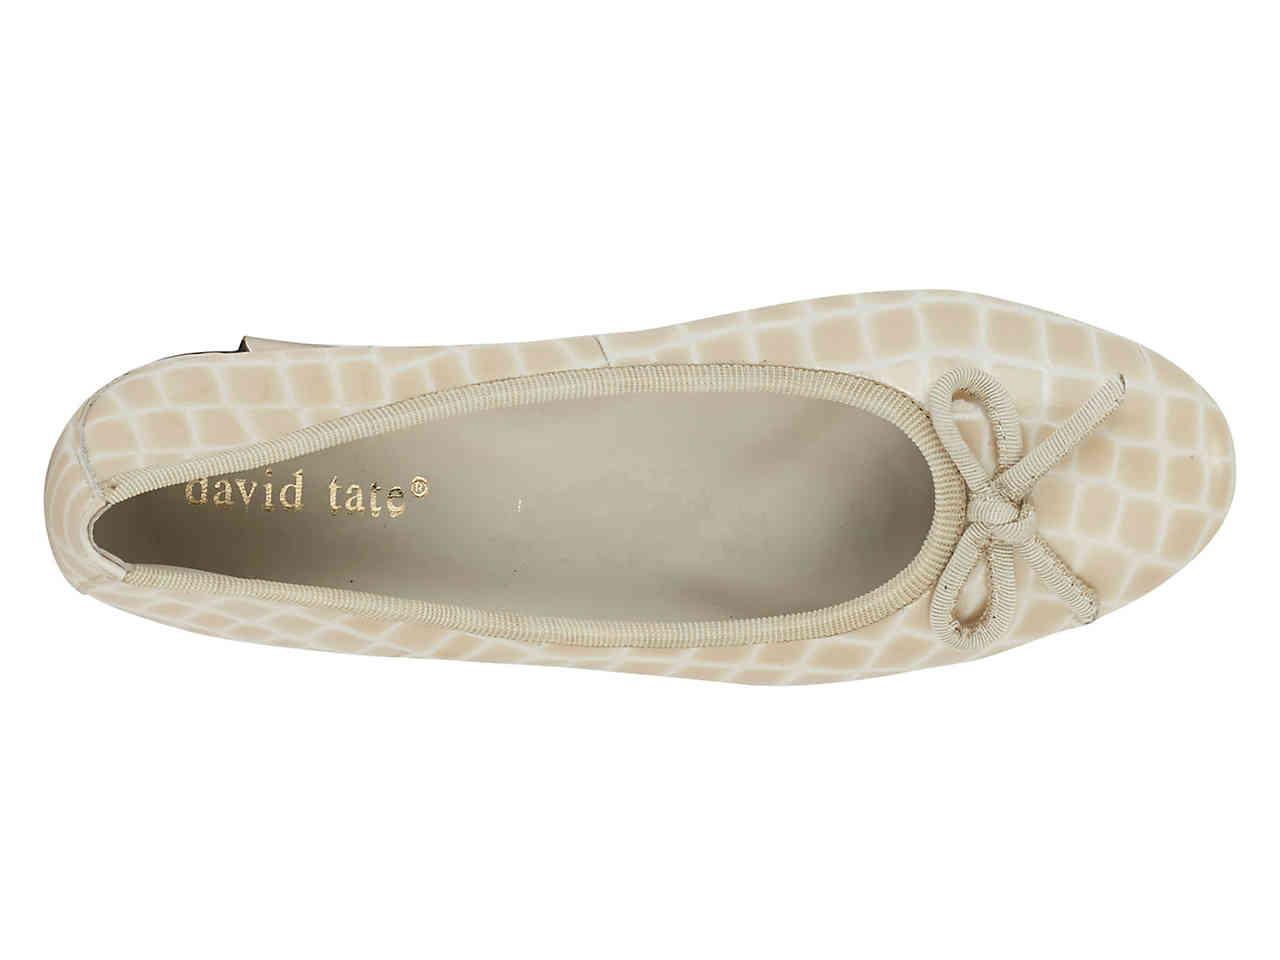 David Tate Giselle Flat in Natural - Lyst